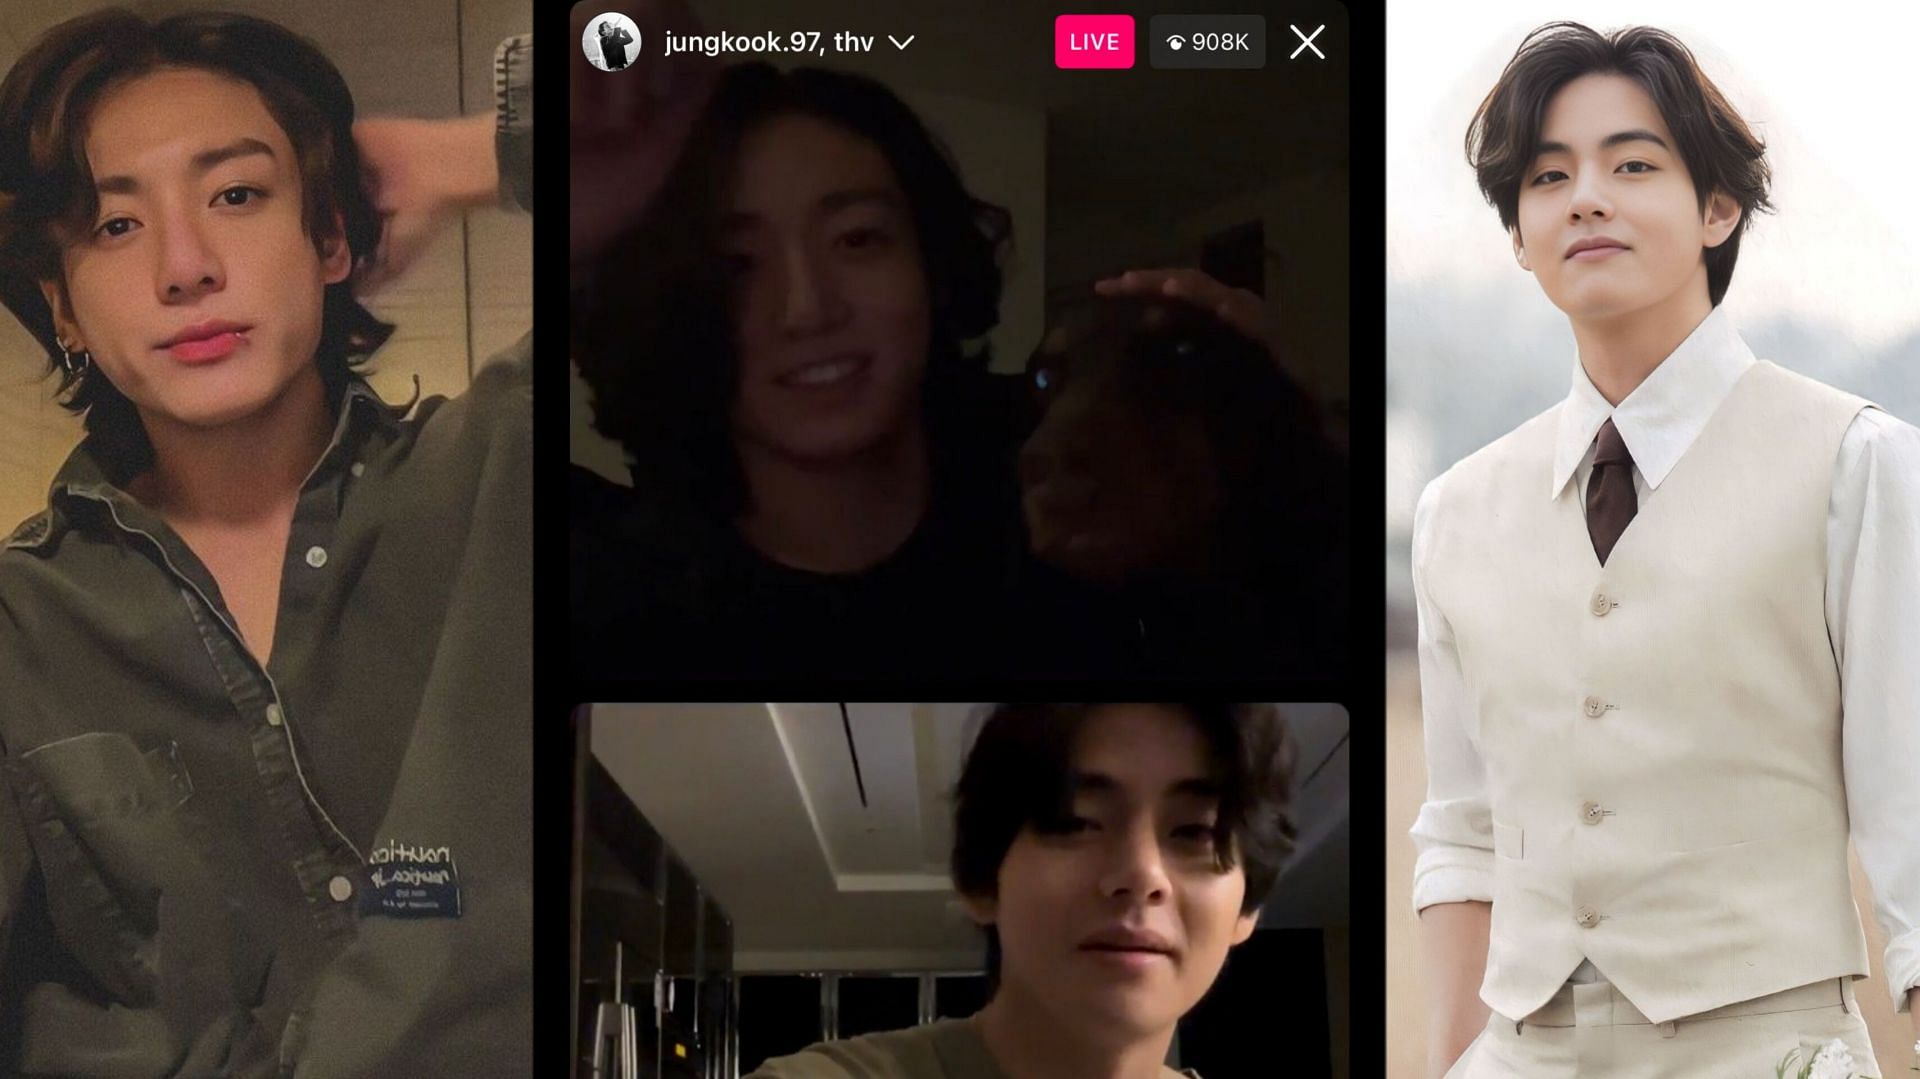 Taekook Insta Live: “We Got The Taekook Insta Live”: Bts Jungkook And V  Create History With The Group'S First Instagram Live, Sending Armys Into A  Frenzy